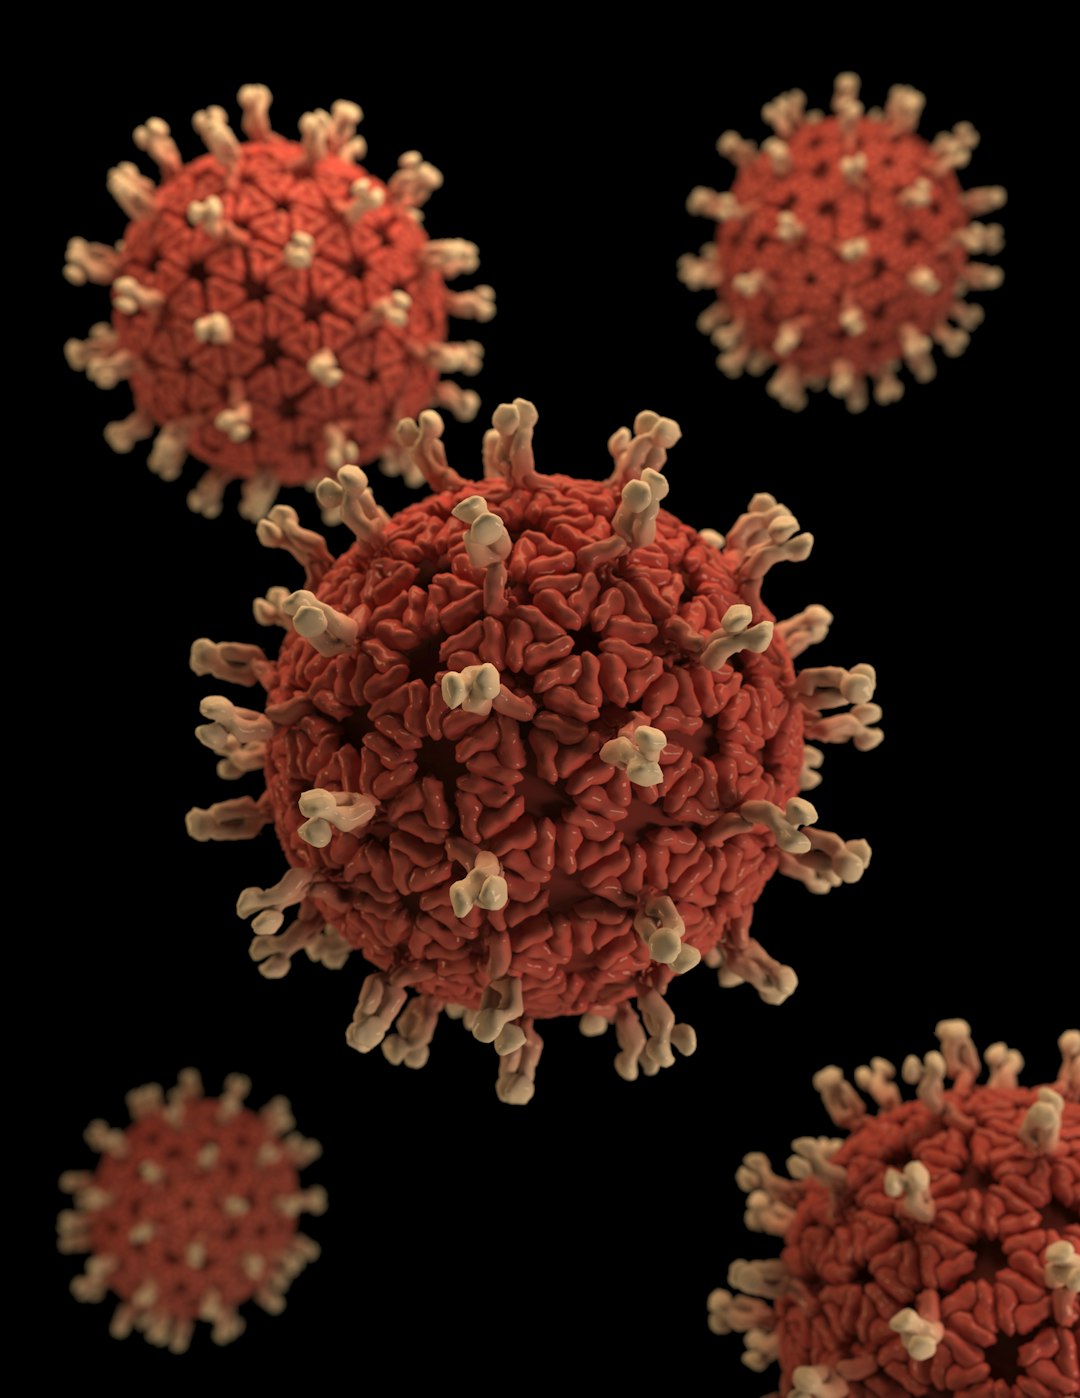 This illustration provided a 3D graphical representation of a number of Rotavirus virions, set against a black background. Note the organism’s characteristic, wheel-like appearance, which was made visible when viewed under the electron microscope. It’s this morphology that gives the Rotavirus its name, which is derived from the Latin rota, meaning "wheel". Rotaviruses are nonenveloped, double-shelled viruses, making them quite stable in the environment.